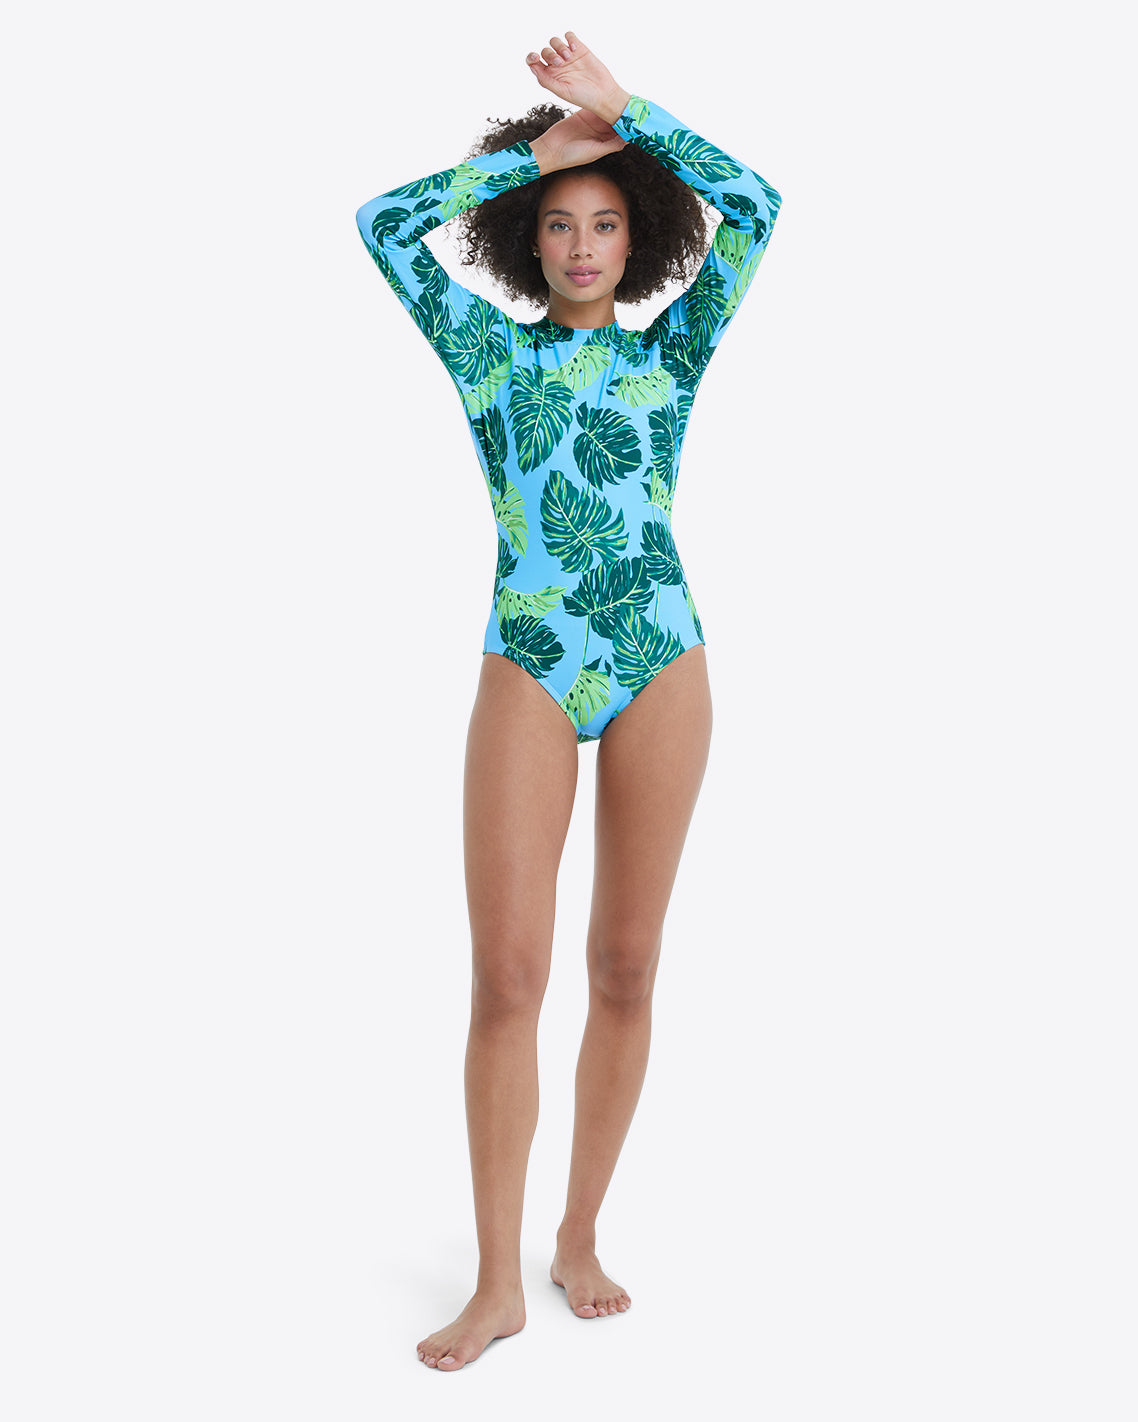 Rashguard One Piece Swimsuit in Monstera Floral